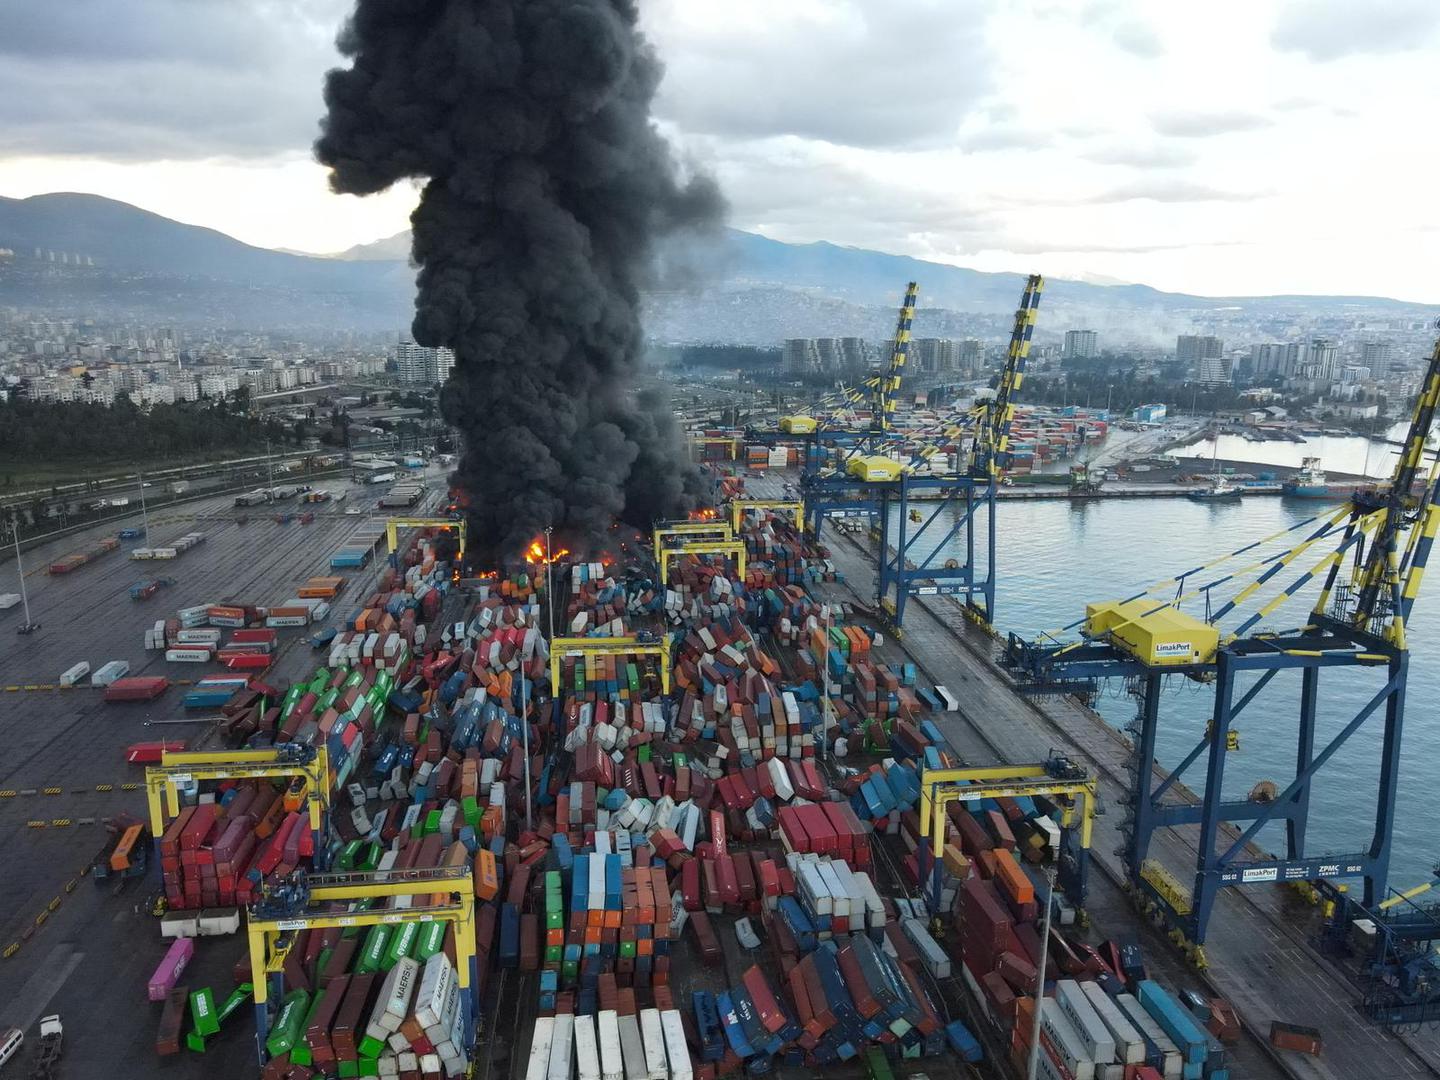 Black smoke from a fire is seen at the Iskenderun port after an earthquake in Iskenderun, Turkey February 7, 2023. Serday Ozsoy/Depo Photos via REUTERS ATTENTION EDITORS - THIS PICTURE WAS PROVIDED BY A THIRD PARTY. NO RESALES. NO ARCHIVES. TURKEY OUT. NO COMMERCIAL OR EDITORIAL SALES IN TURKEY. Photo: Depo Photos/REUTERS